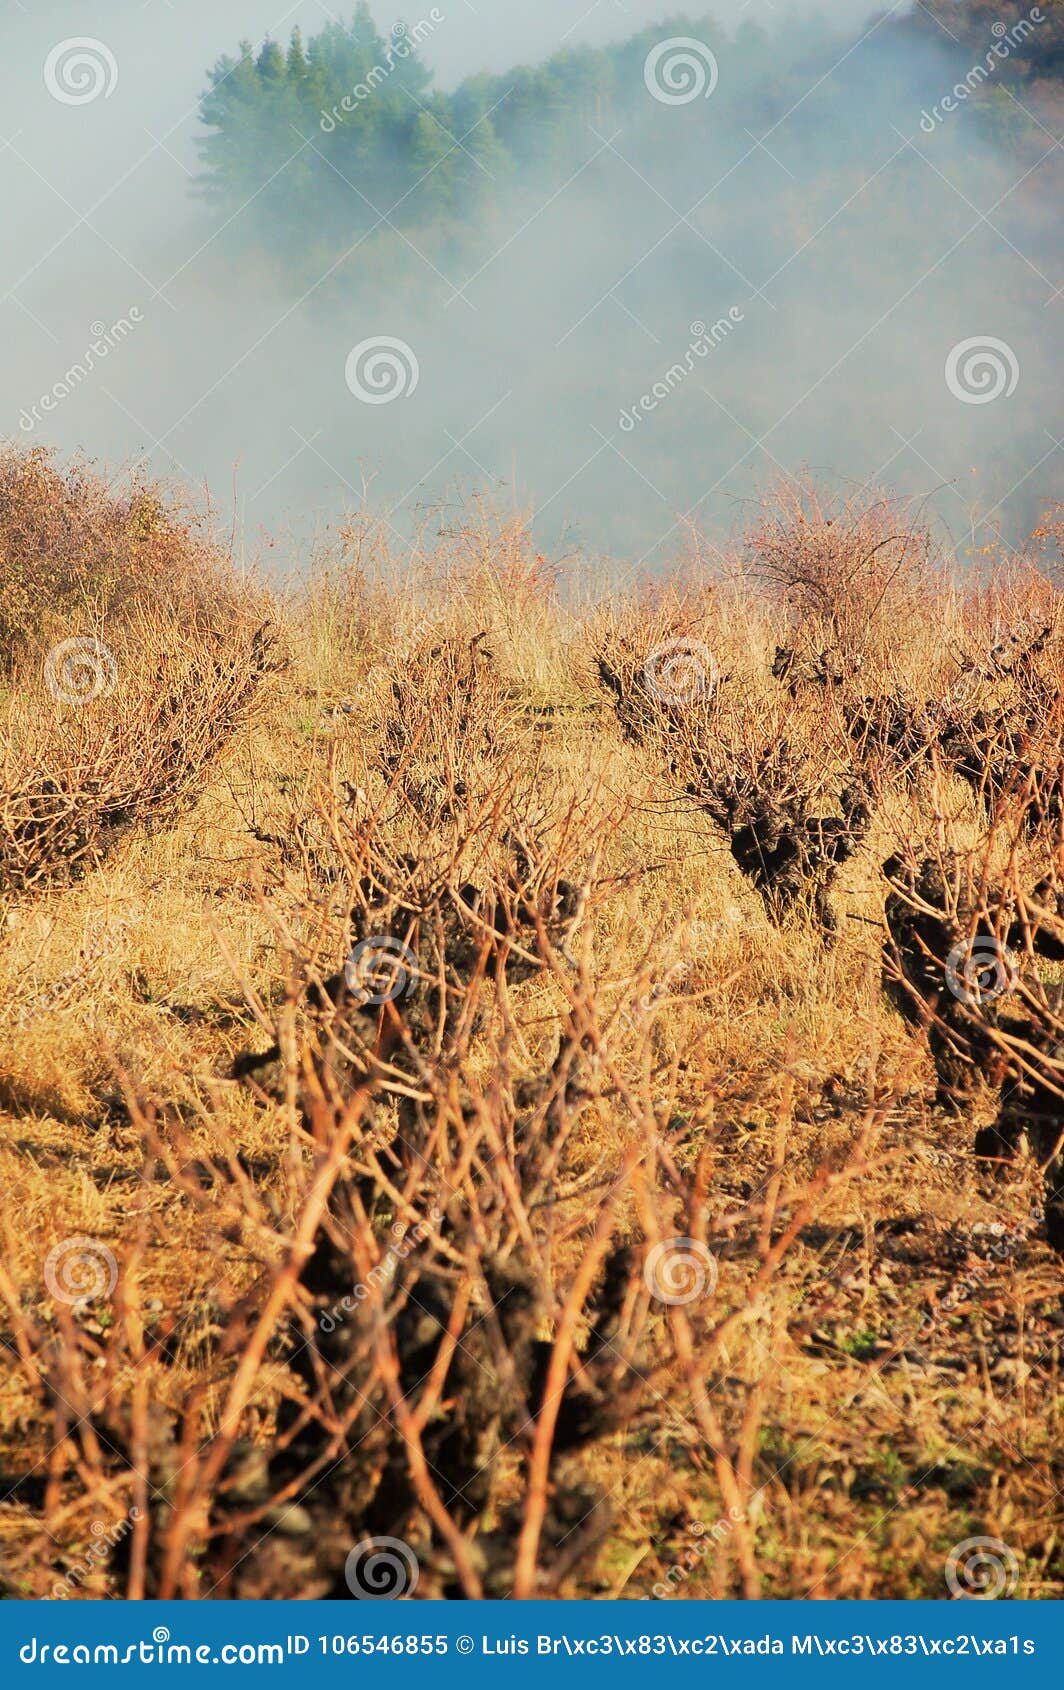 vines in mountain between forests in a foggy day